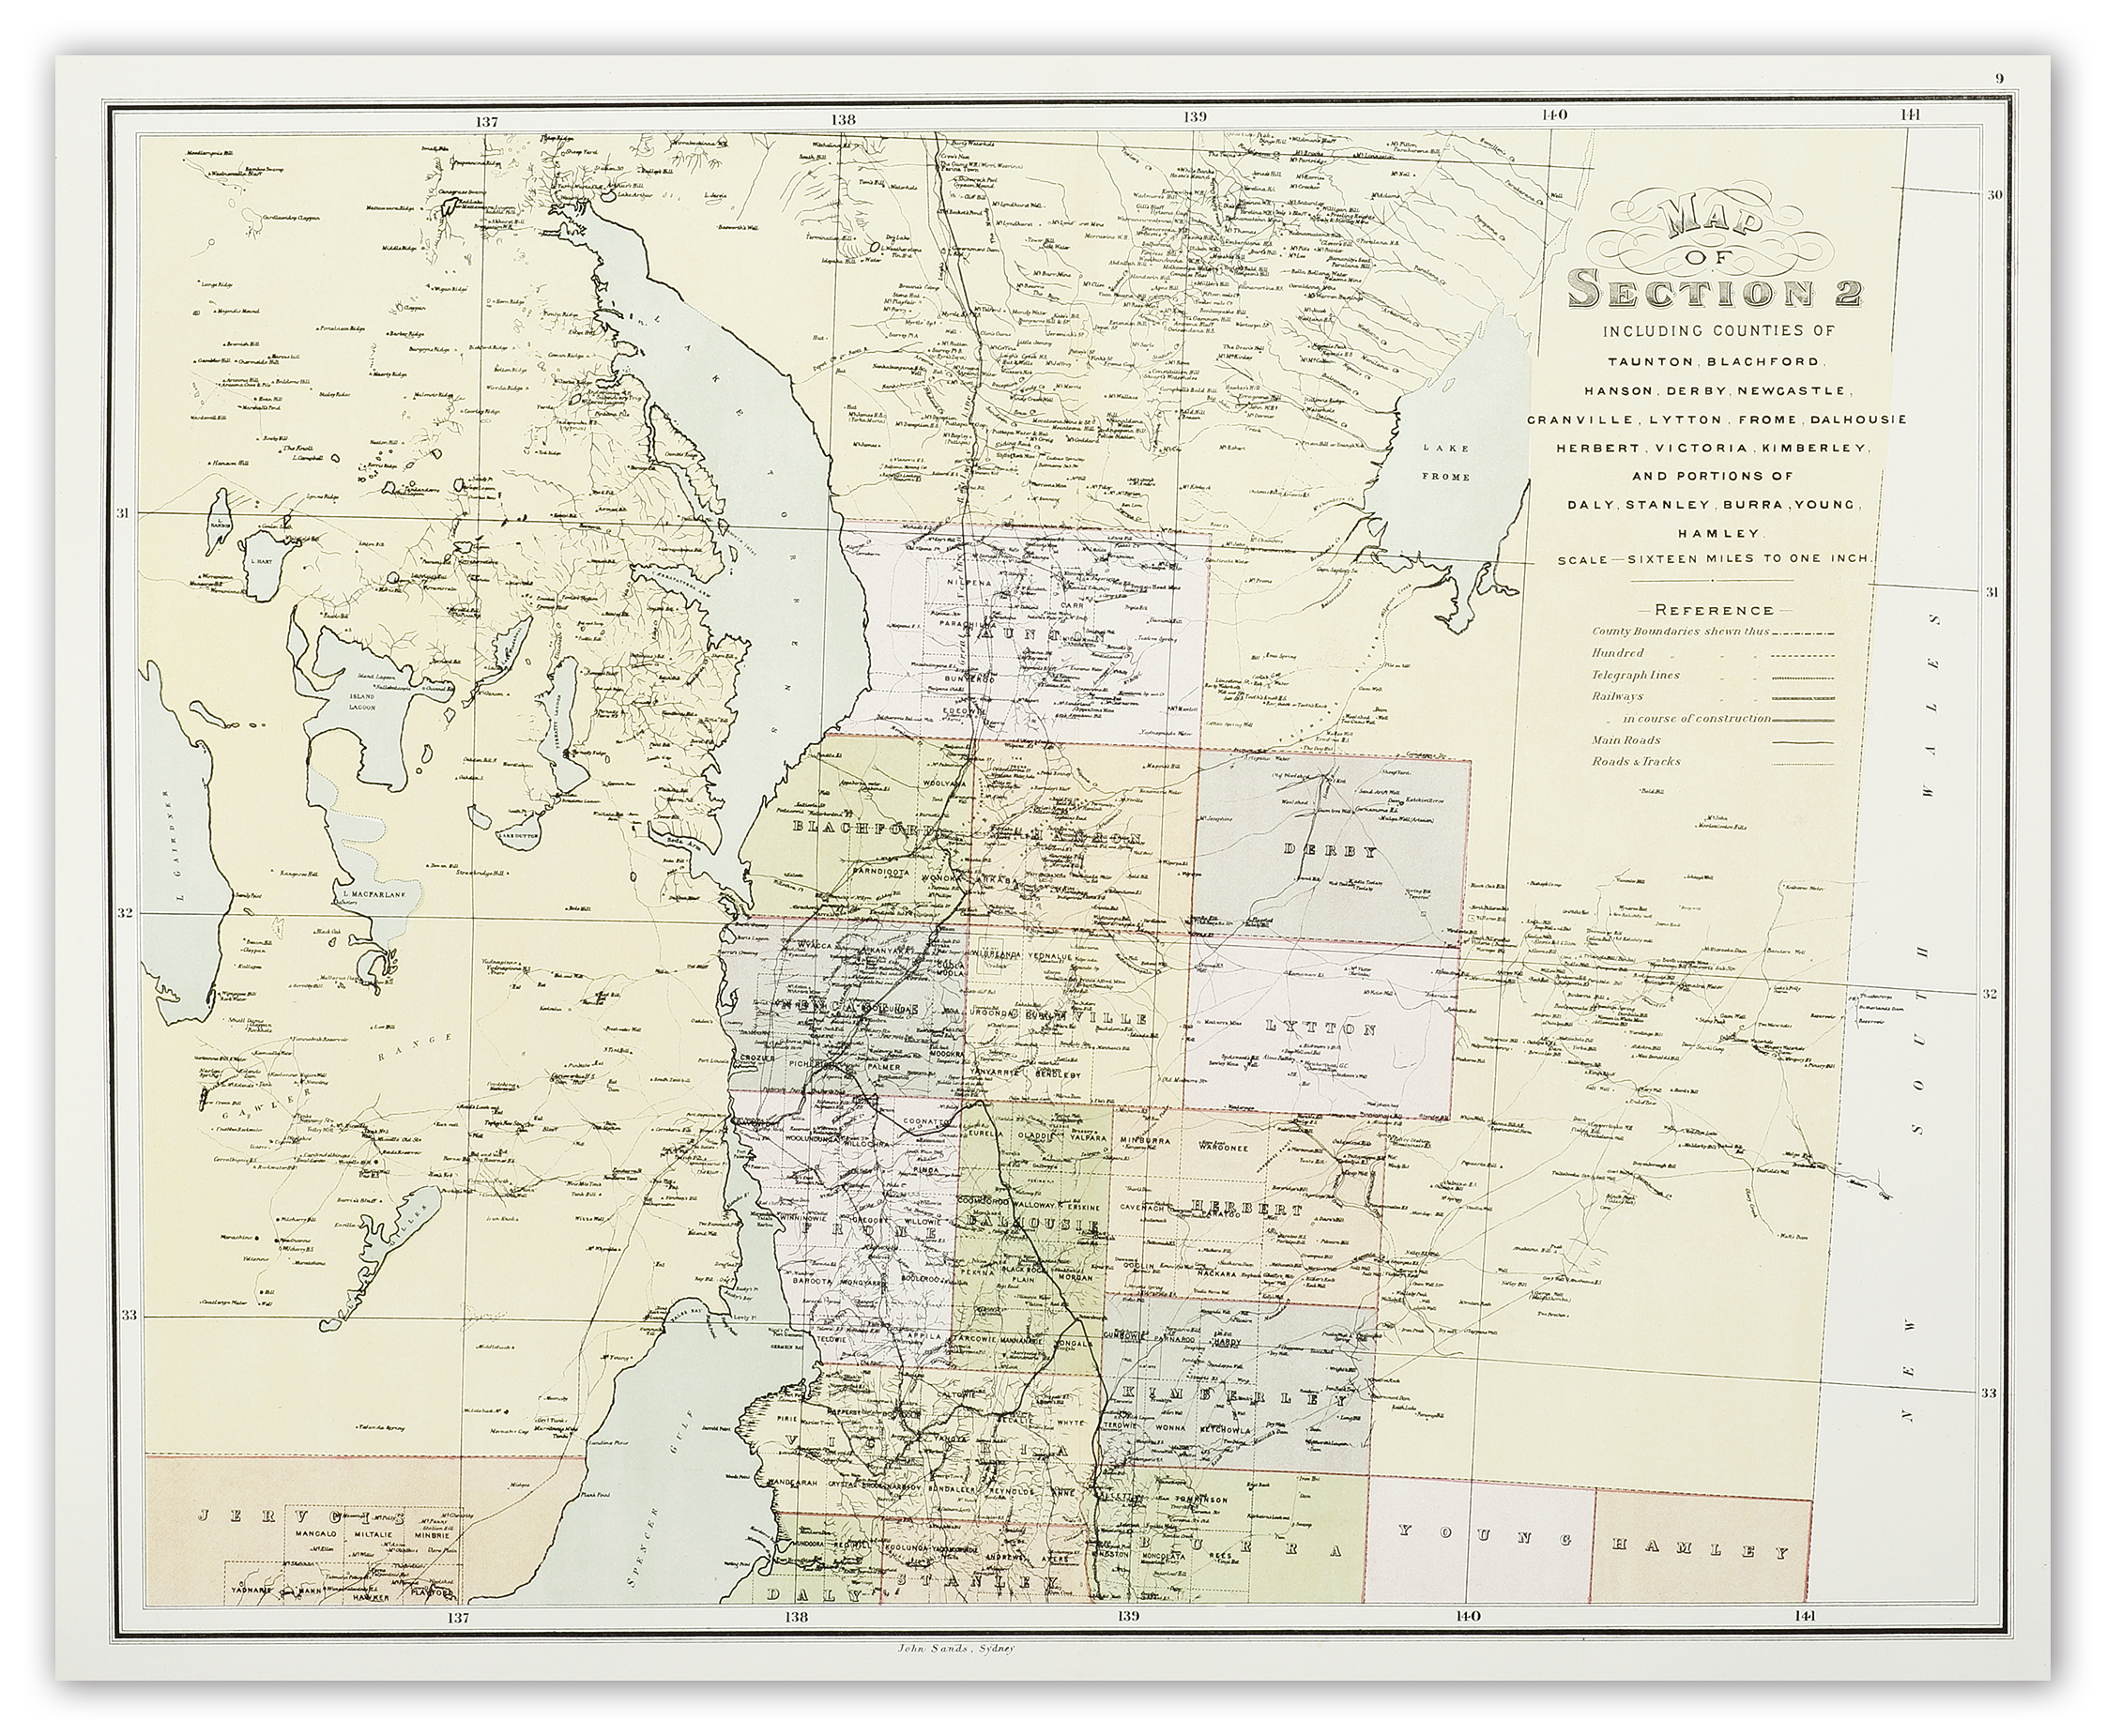 Map of Section 2 Including counties of Taunton, Blachford, Hanson, Derby, Newcastle... - Antique Map from 1886